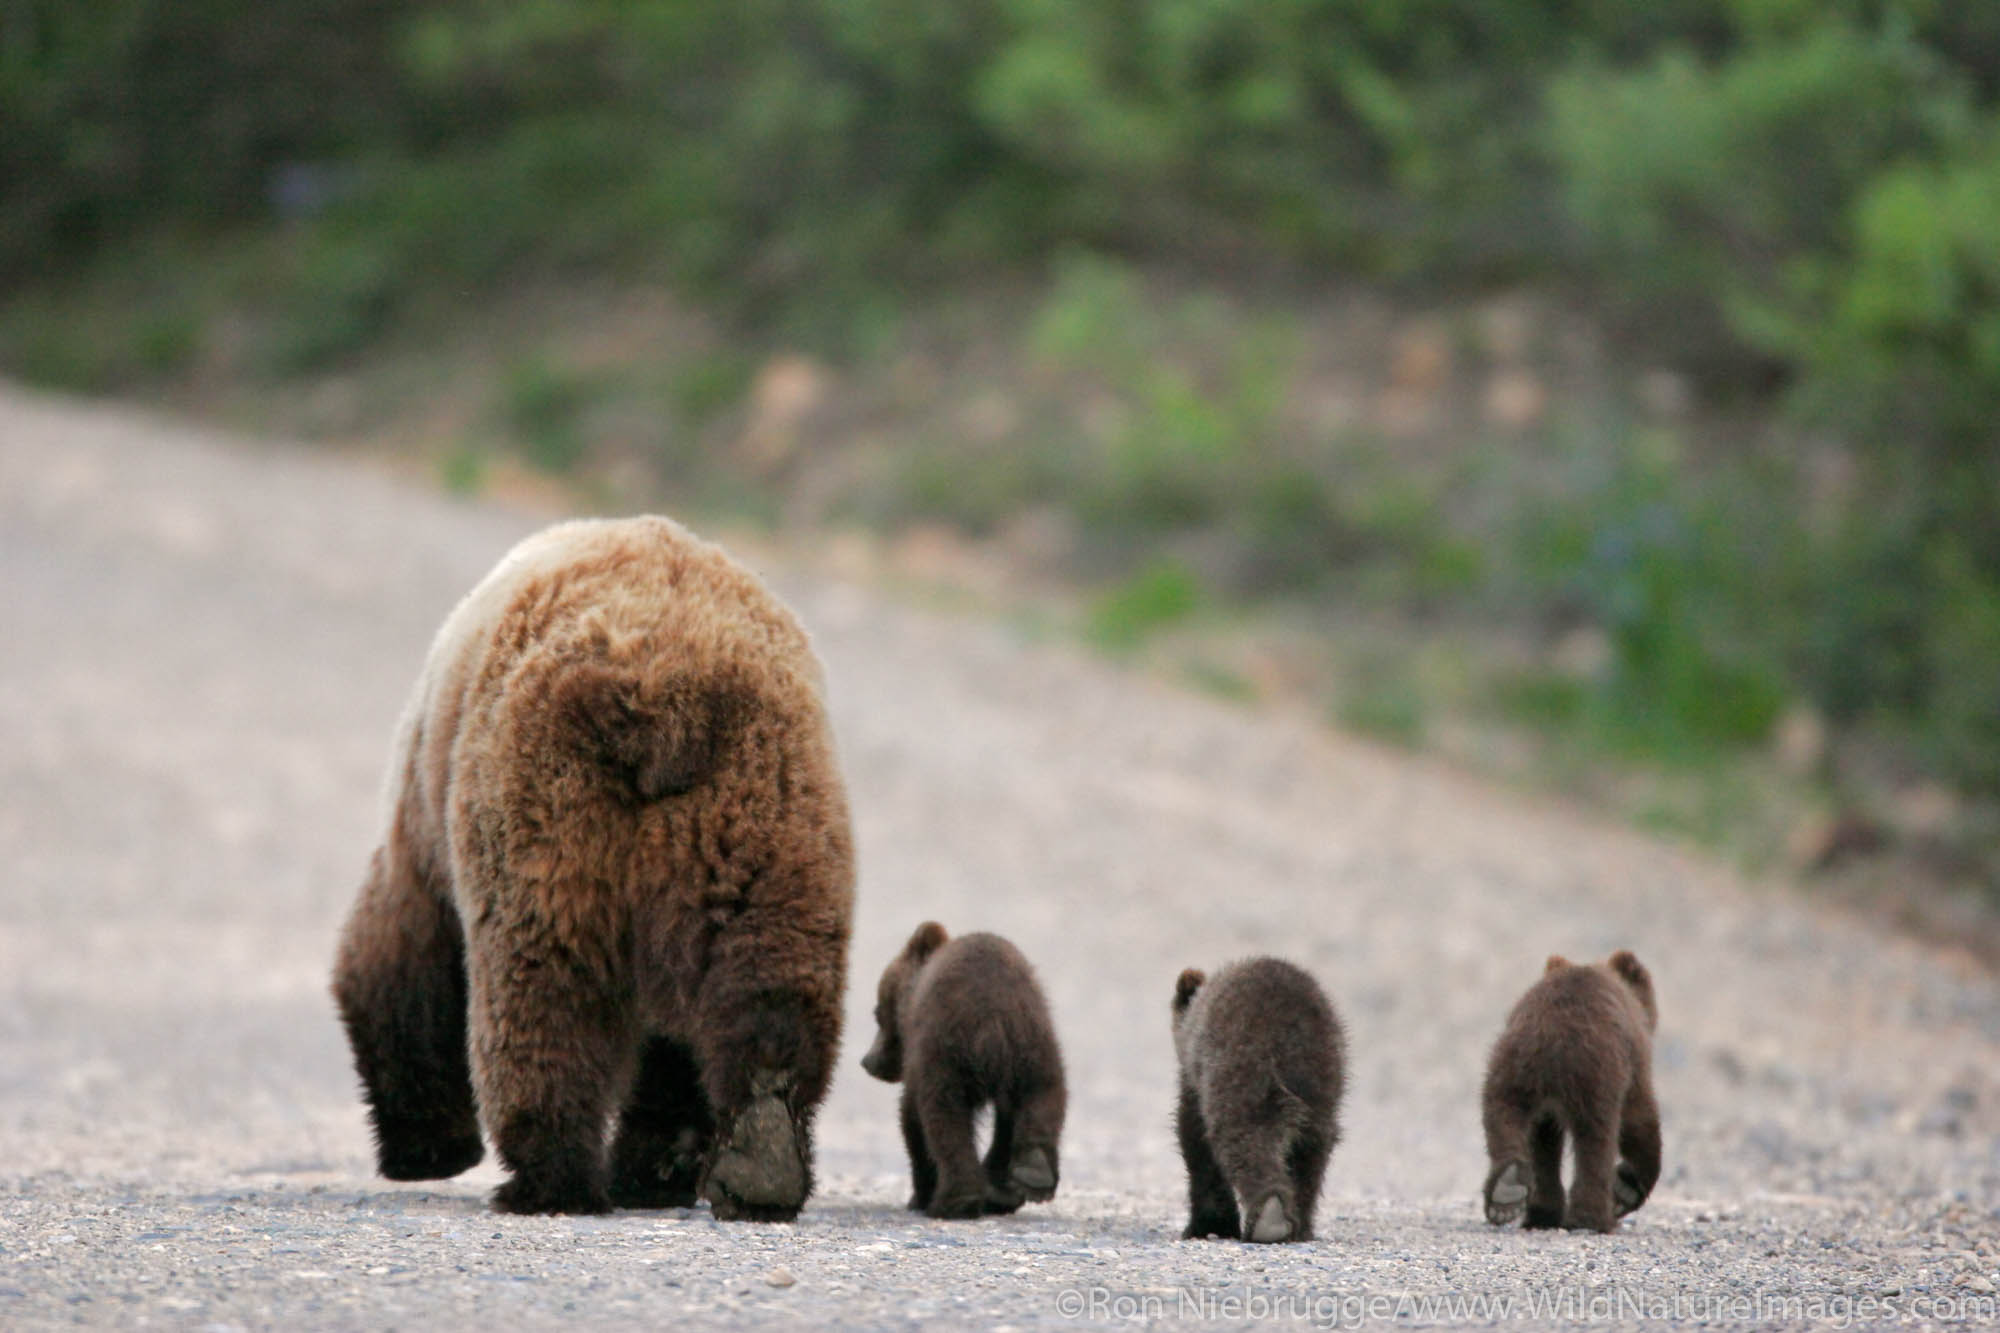 A grizzly or brown bear (Ursus arctos) sow and three spring cubs in Denali National Park, Alaska.